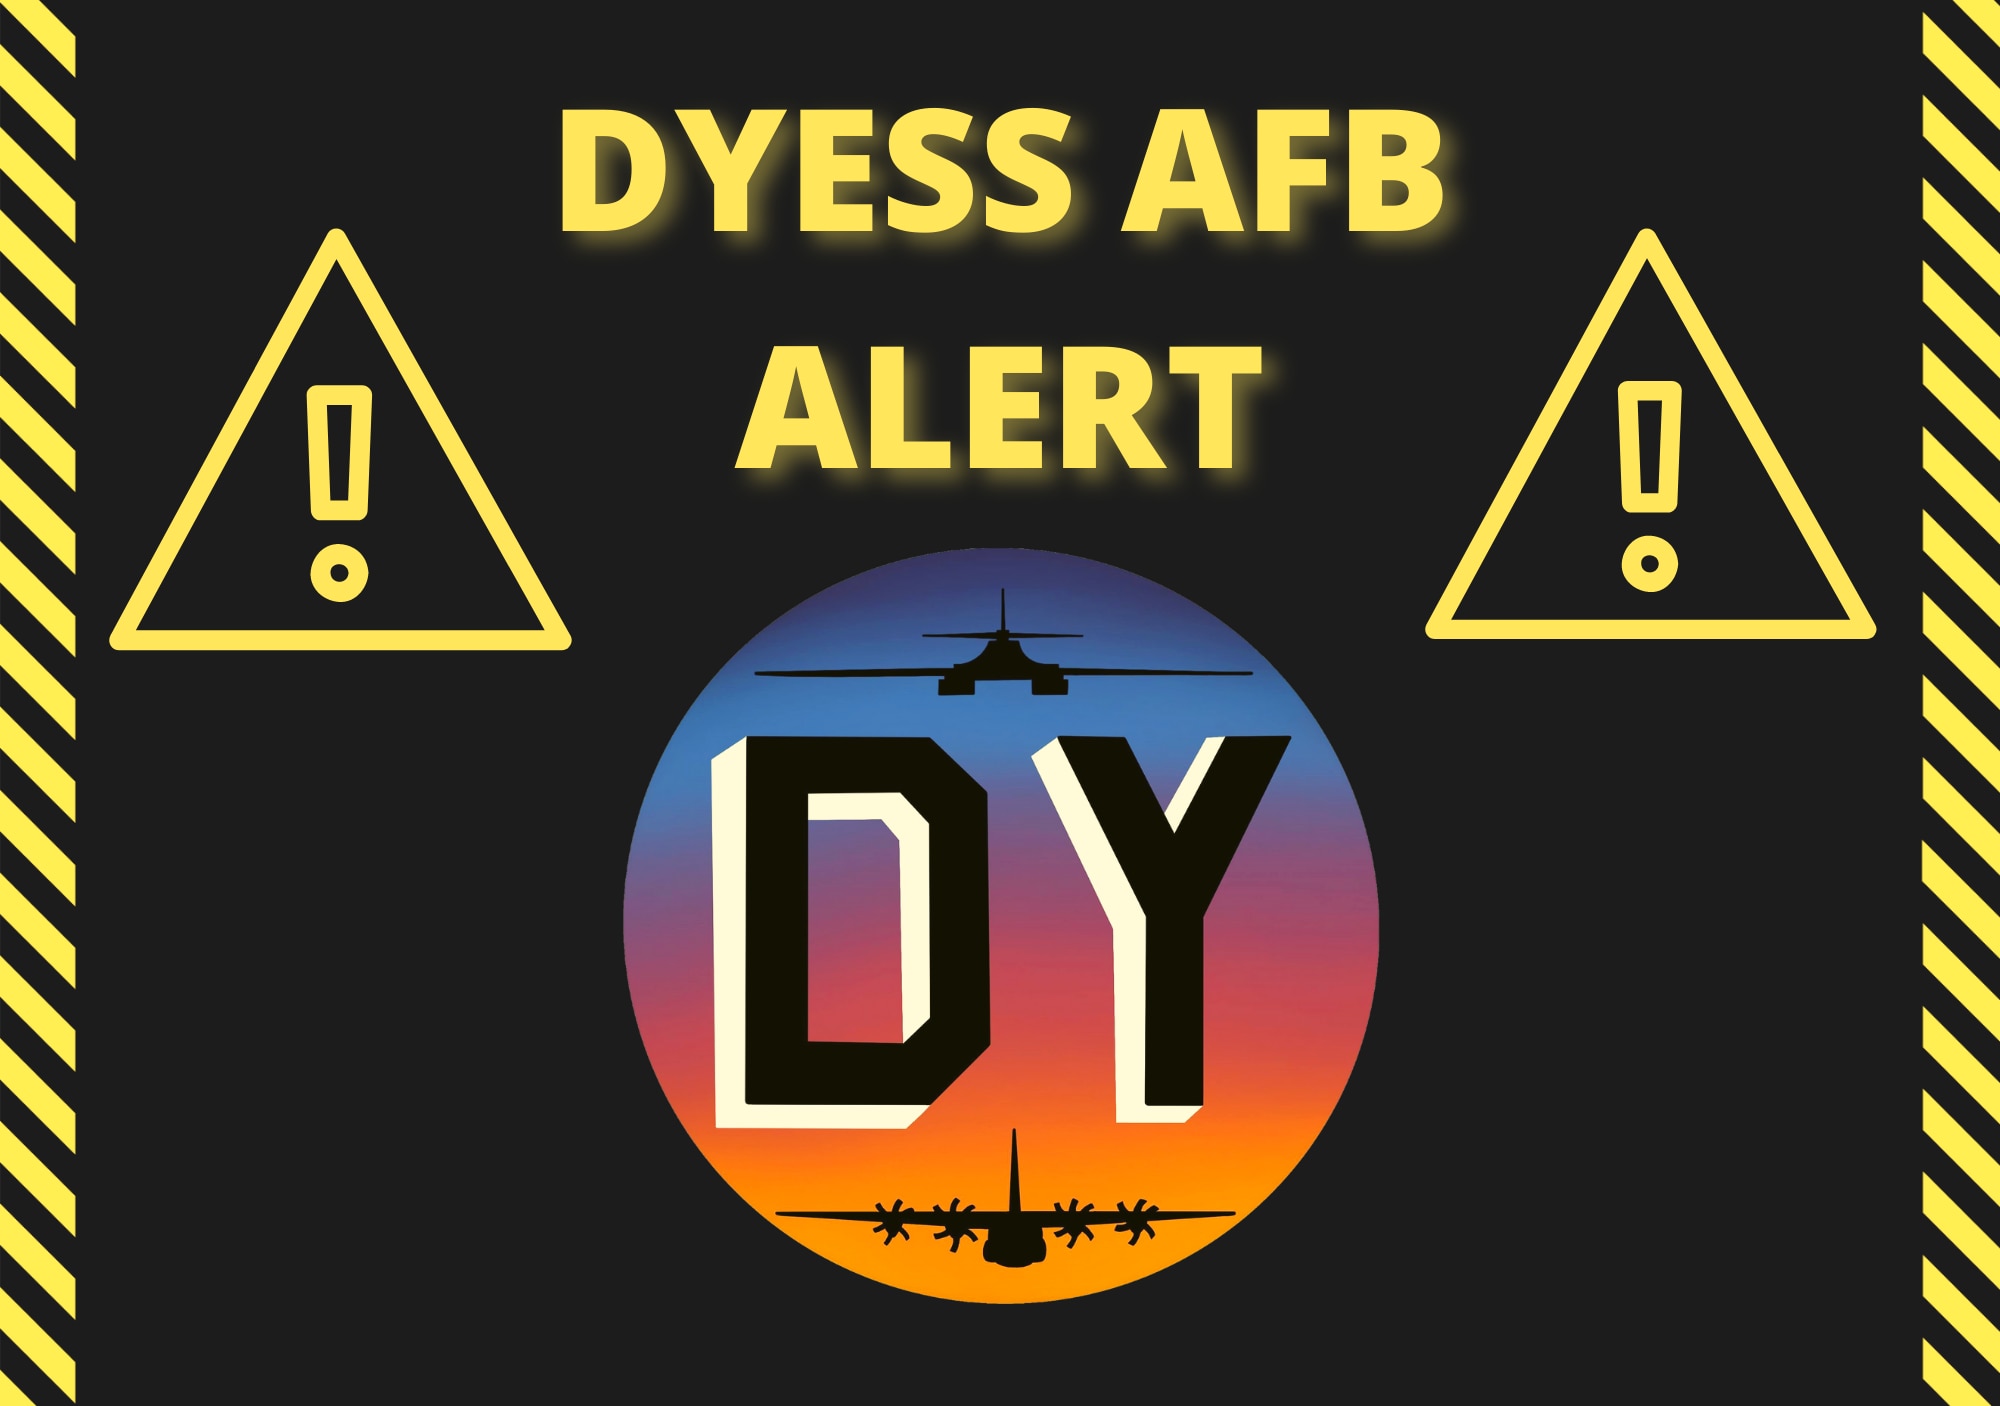 The 7th Bomb Wing’s emergency operations center was activated around 12:30 p.m. May 24 to discuss base fire response plans as a pre-emptive safety measure should the local Mesquite Heat Fire impact Dyess Air Force Base or its members.